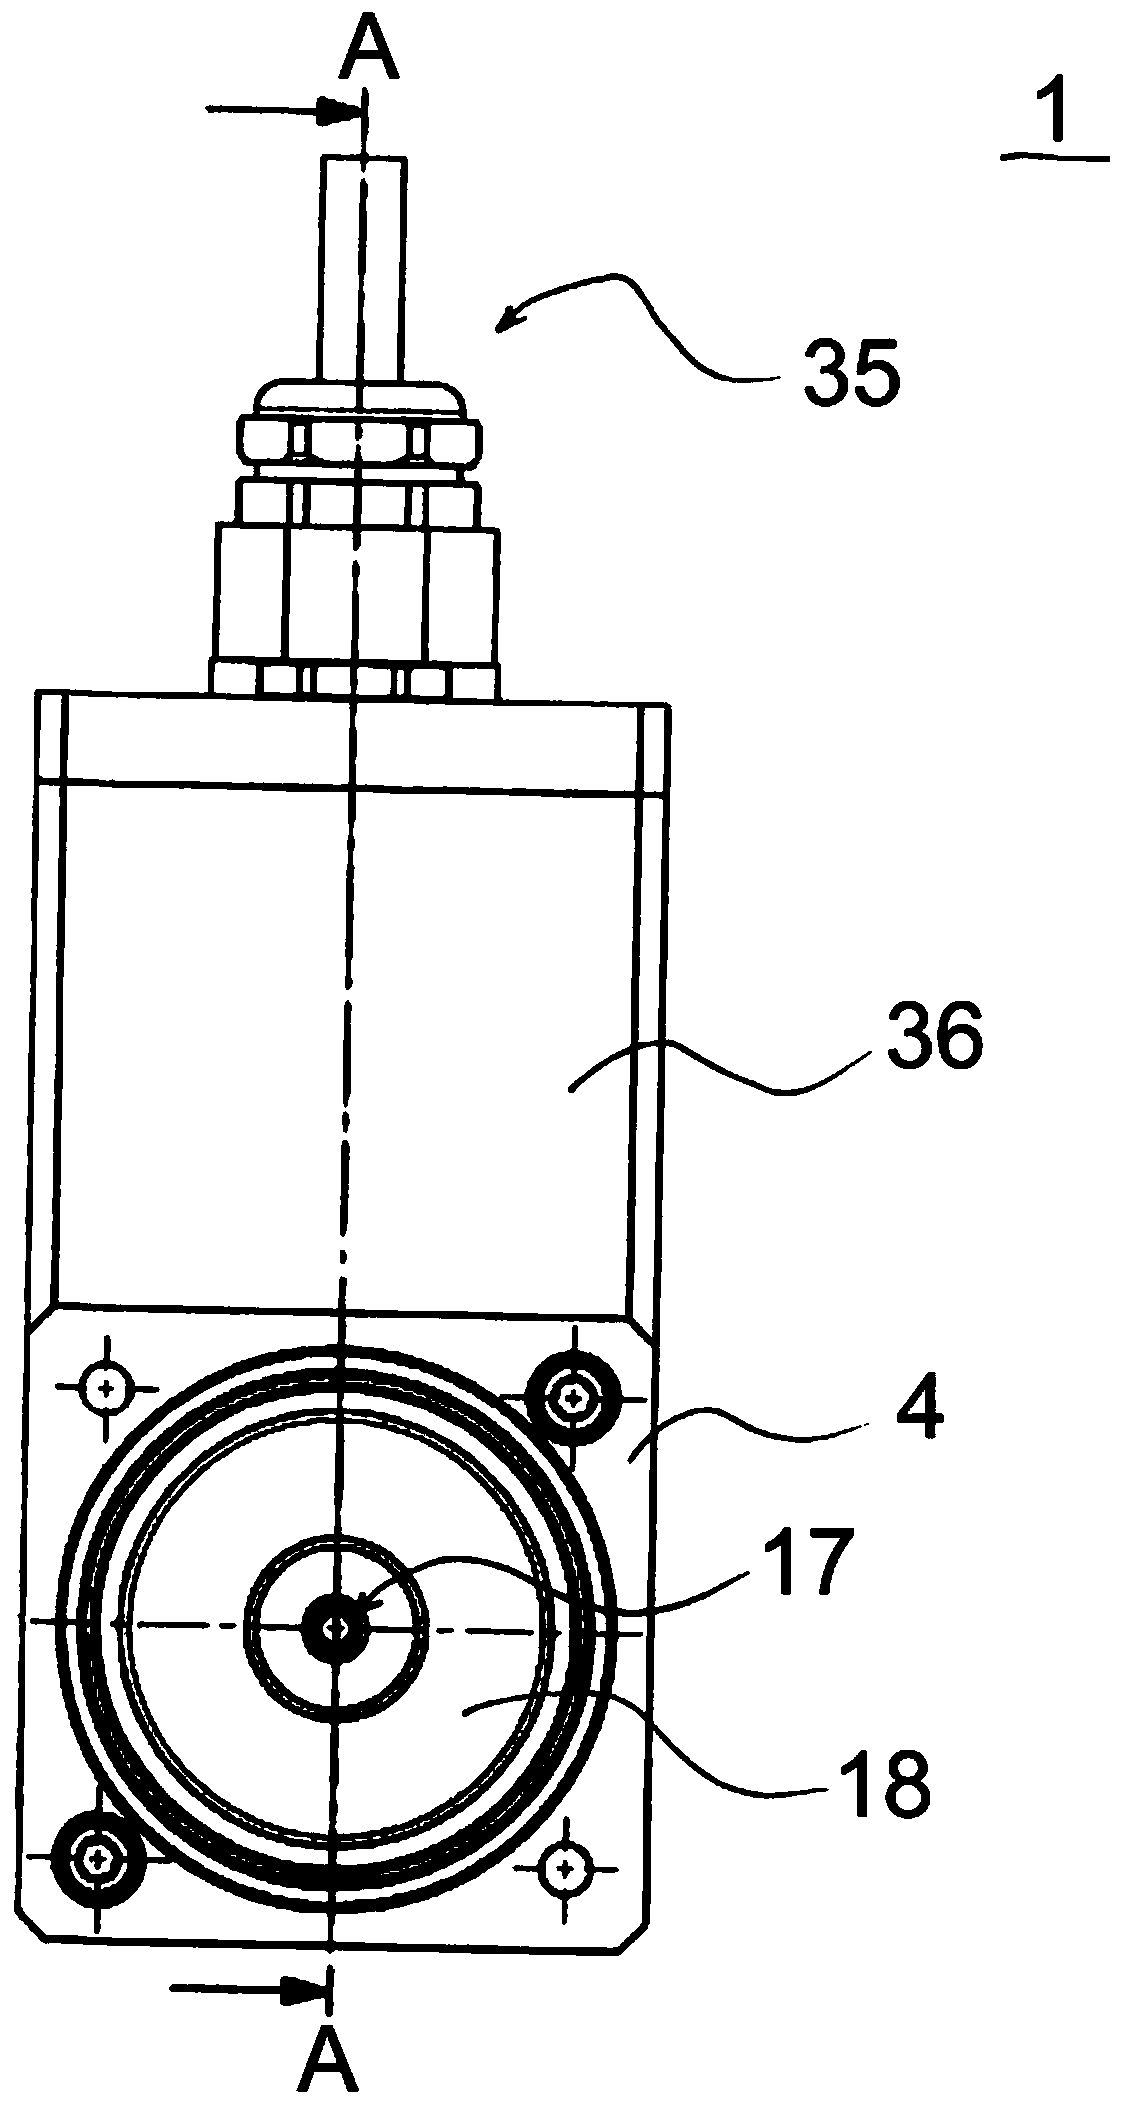 Electromagnetically actuated drives for linear motion